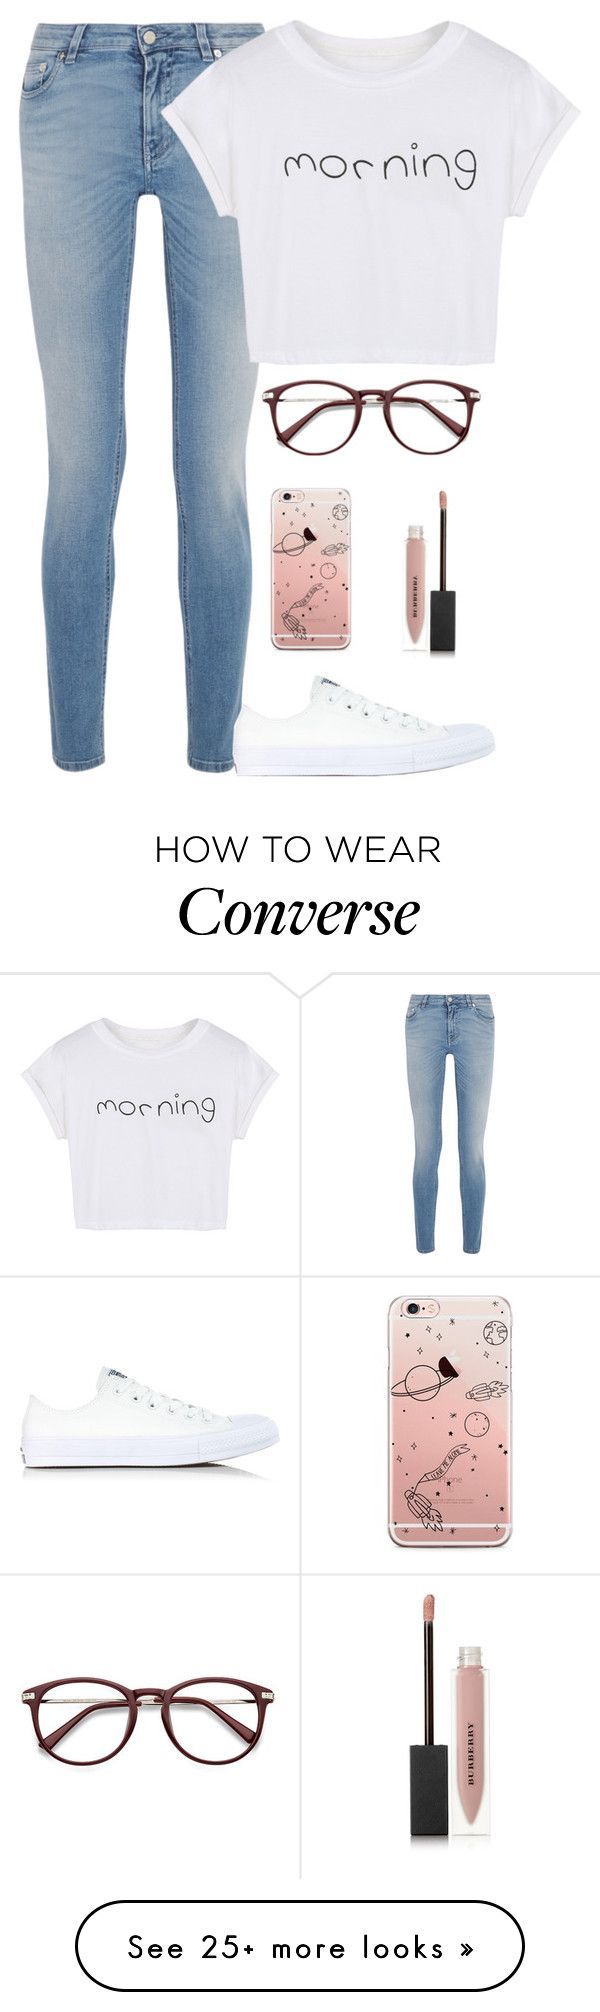 “morning” by pikenapayne on Polyvore featuring Givenchy, WithChic, Converse and Burberry